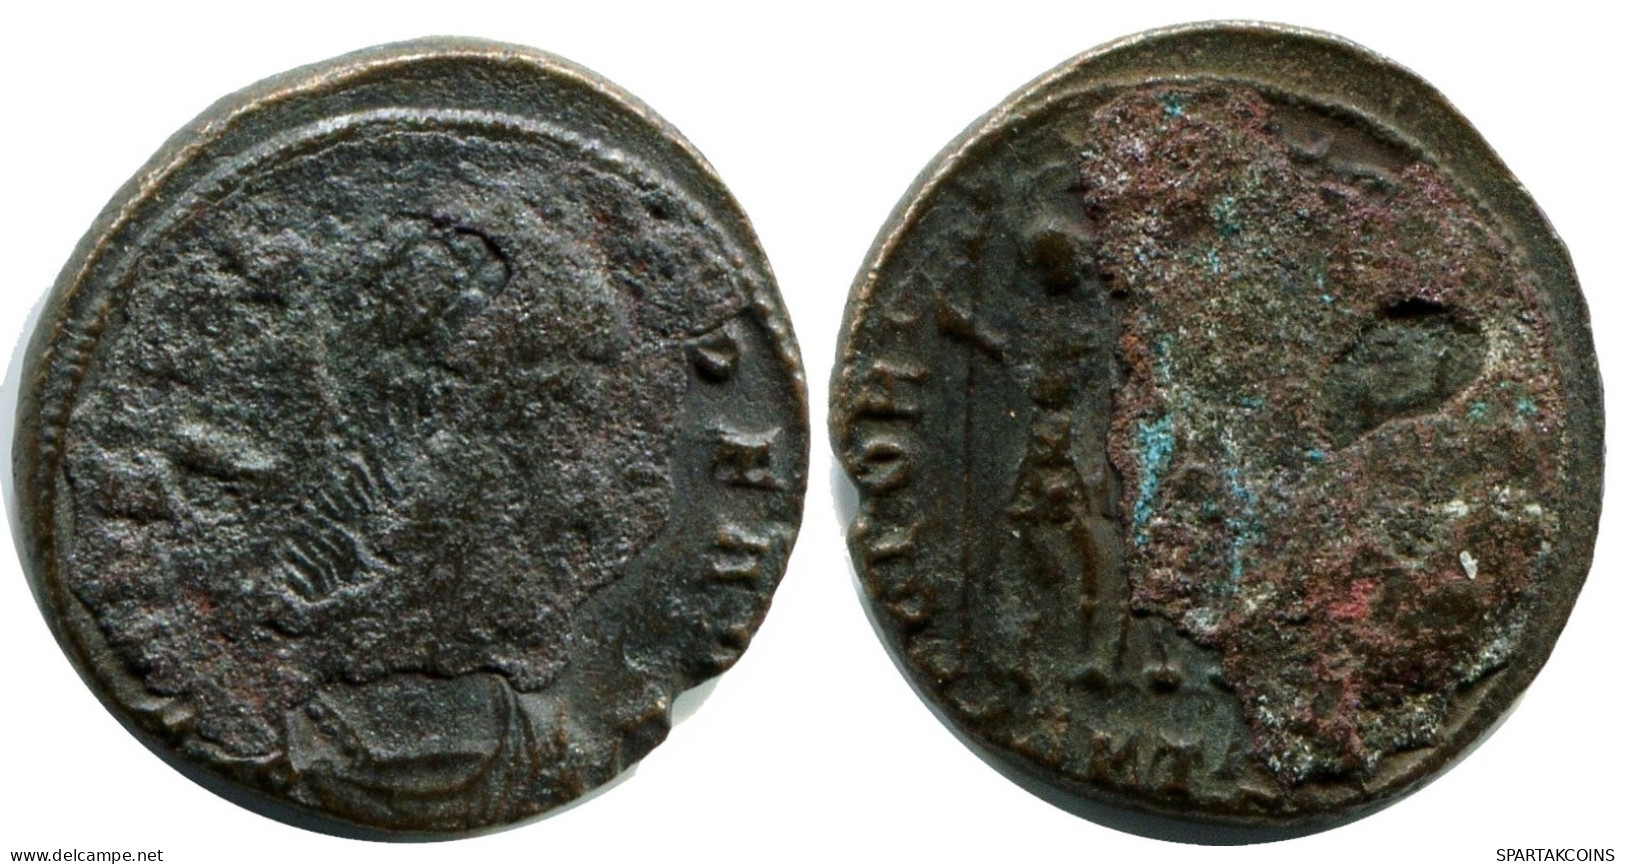 CONSTANS MINTED IN THESSALONICA FROM THE ROYAL ONTARIO MUSEUM #ANC11917.14.U.A - The Christian Empire (307 AD Tot 363 AD)